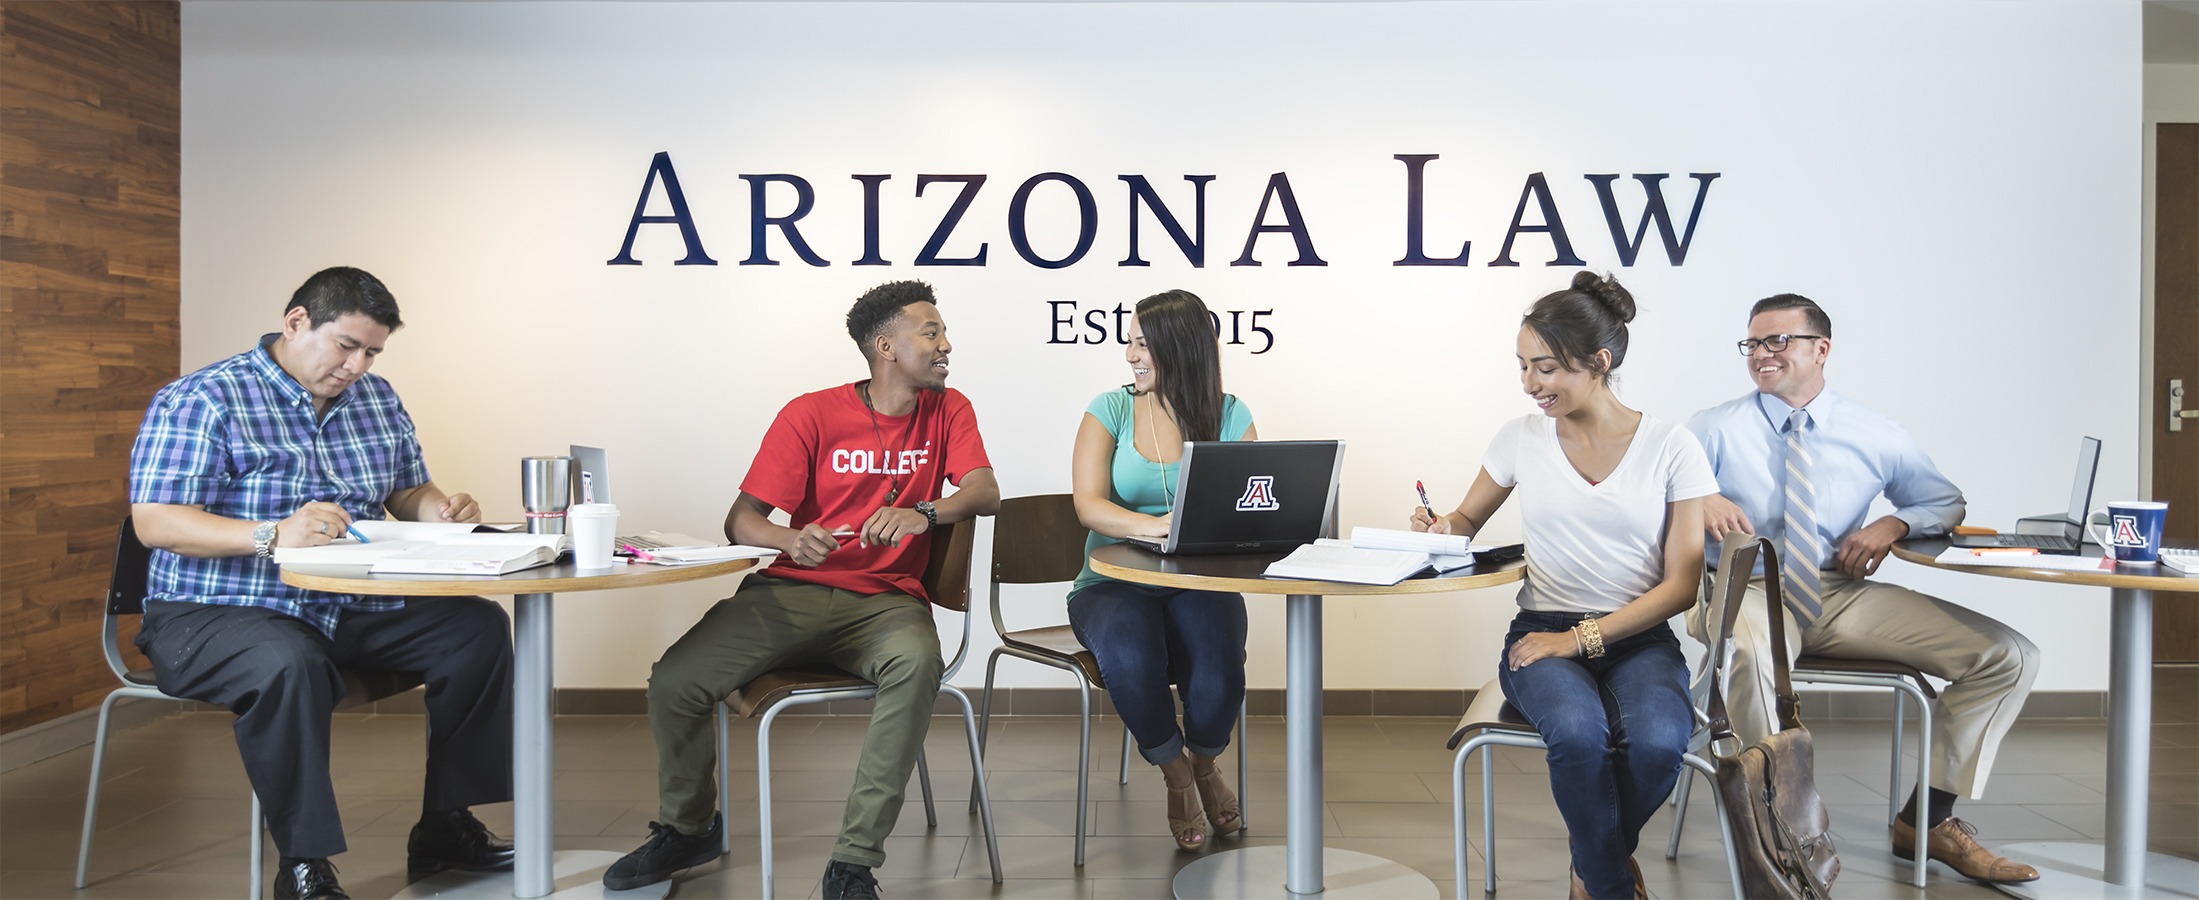 Five students study and talk while seated at tables in front of an Arizona Law sign